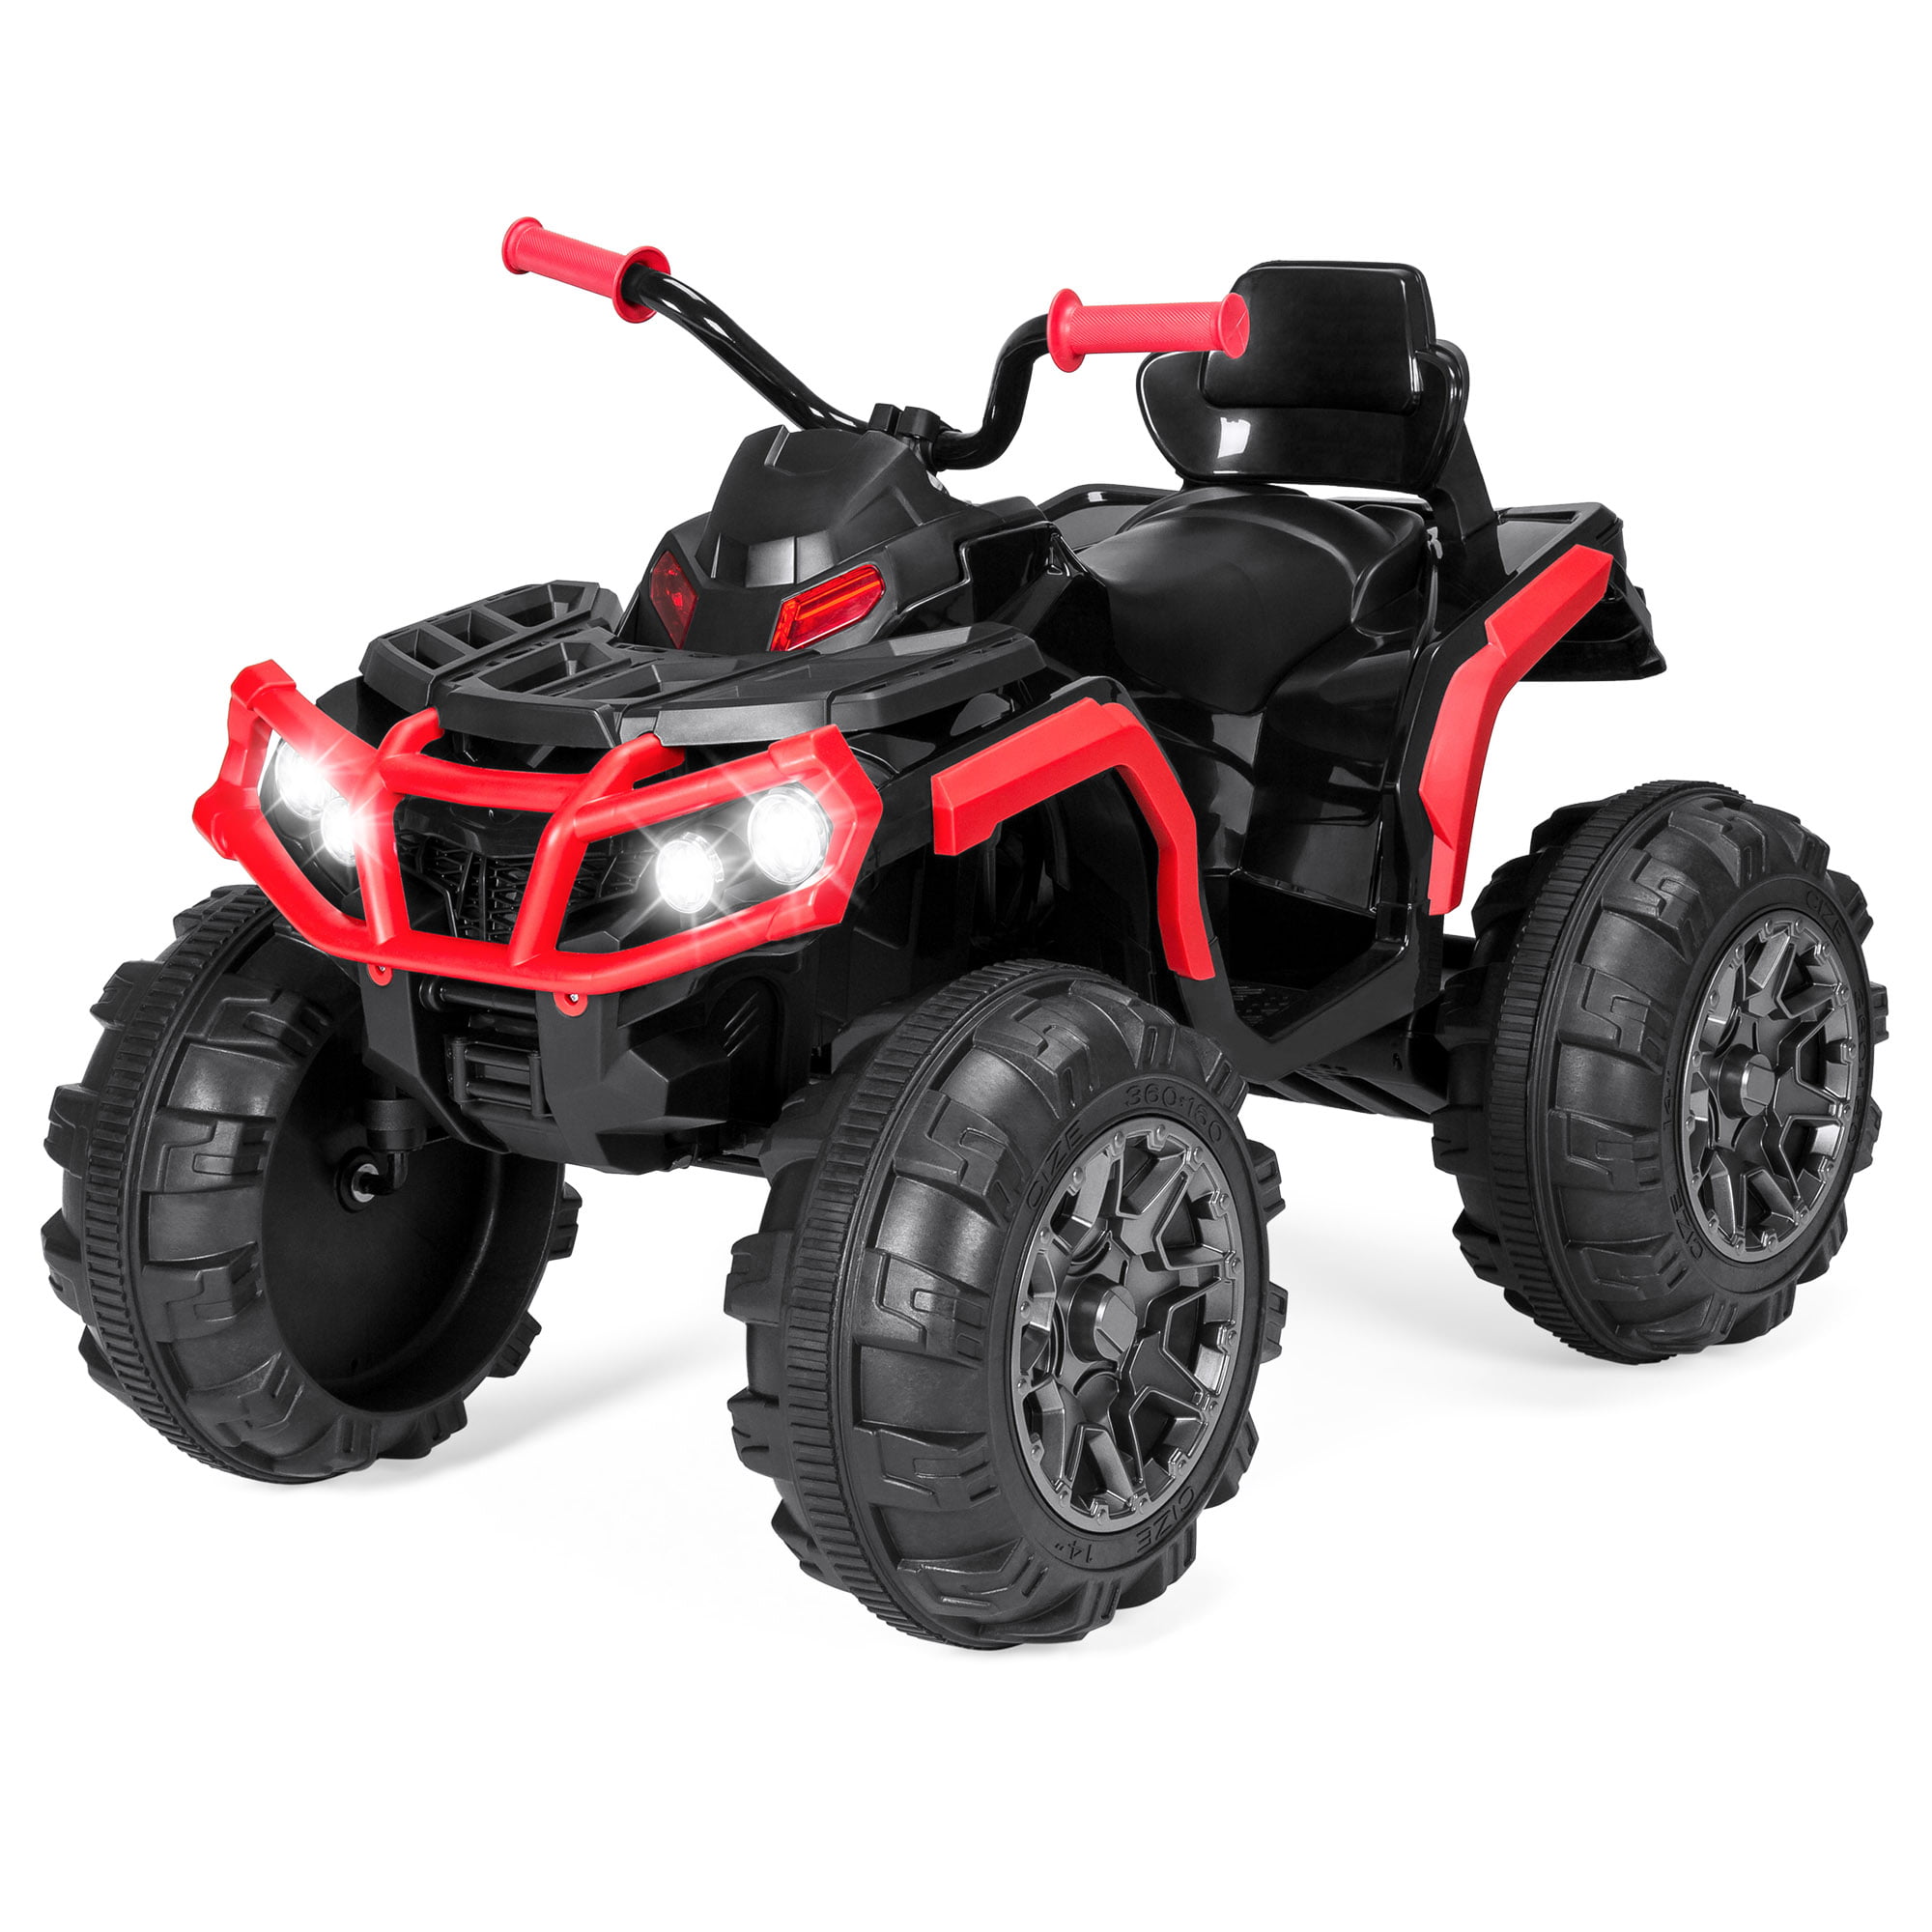 Best Choice Products 12V Kids 4-Wheeler ATV Quad Ride On Car Toy w/ 3.7mph Max, LED Headlights, AUX Jack, Radio - Red